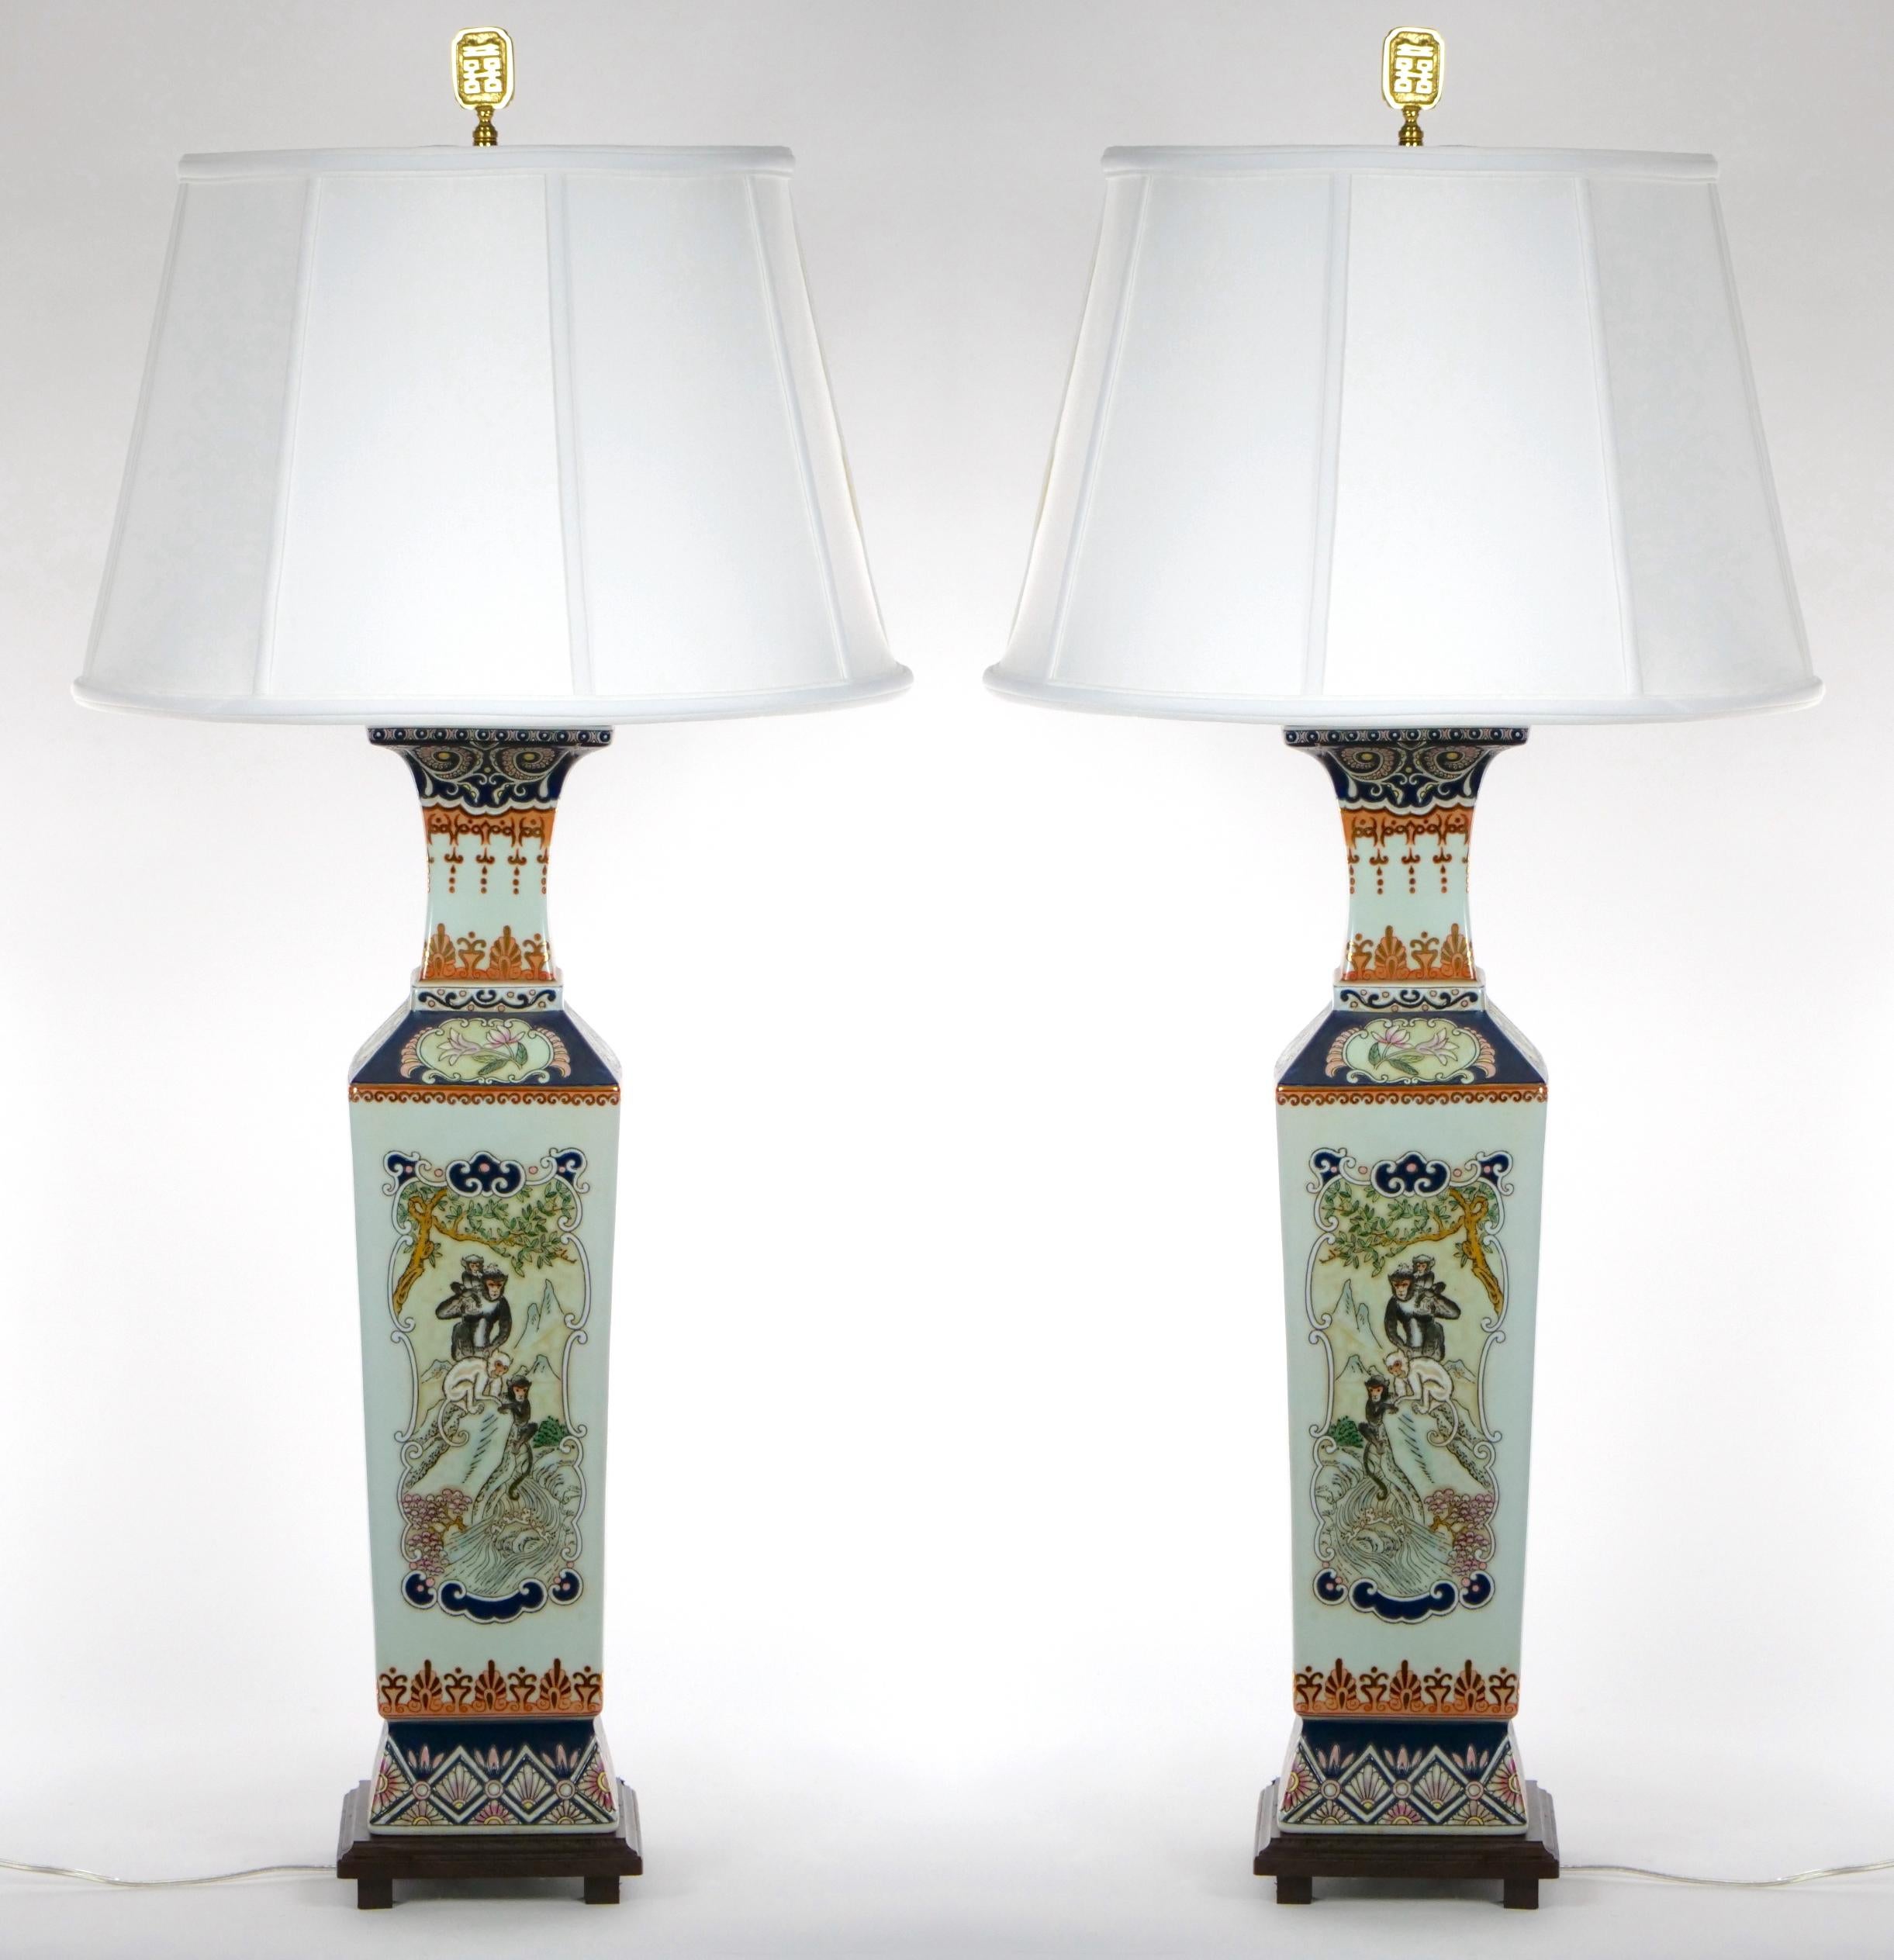 Beautifully hand painted and decorated Chinoiserie scene details glazed porcelain pair table lamp. Each lamp features a different motif of monkeys , foliate and floral scene background on each side resting on a square footed base. Each lamp is in